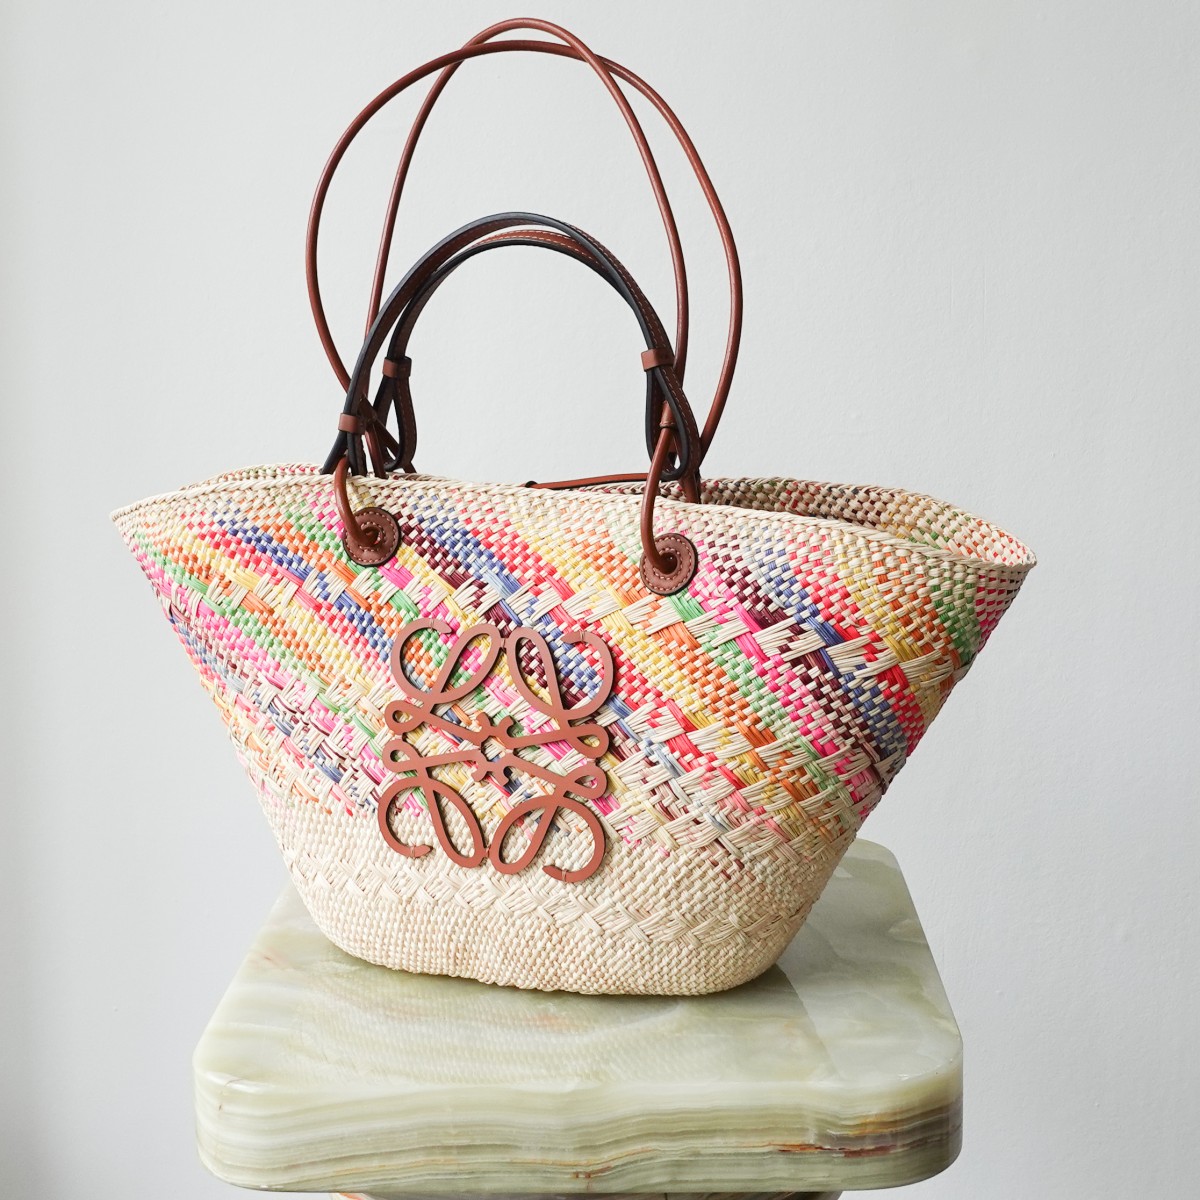 Loewe Small Rainbow Anagram Basket In Iraca Palm And Calfskin in